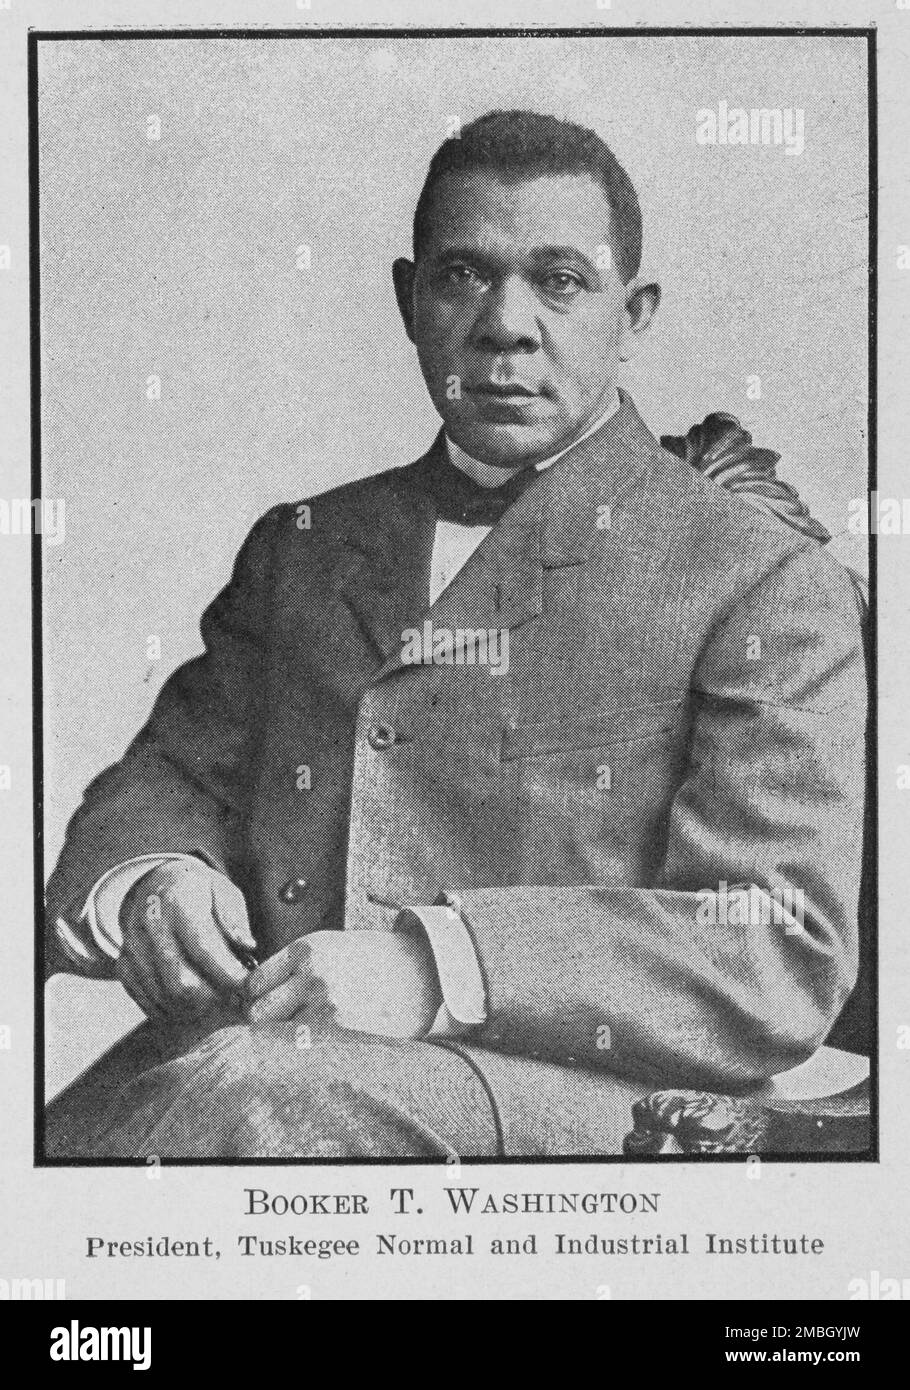 Booker T. Washington; Präsident des Tuskegee Normal and Industrial Institute, 1911. Stockfoto